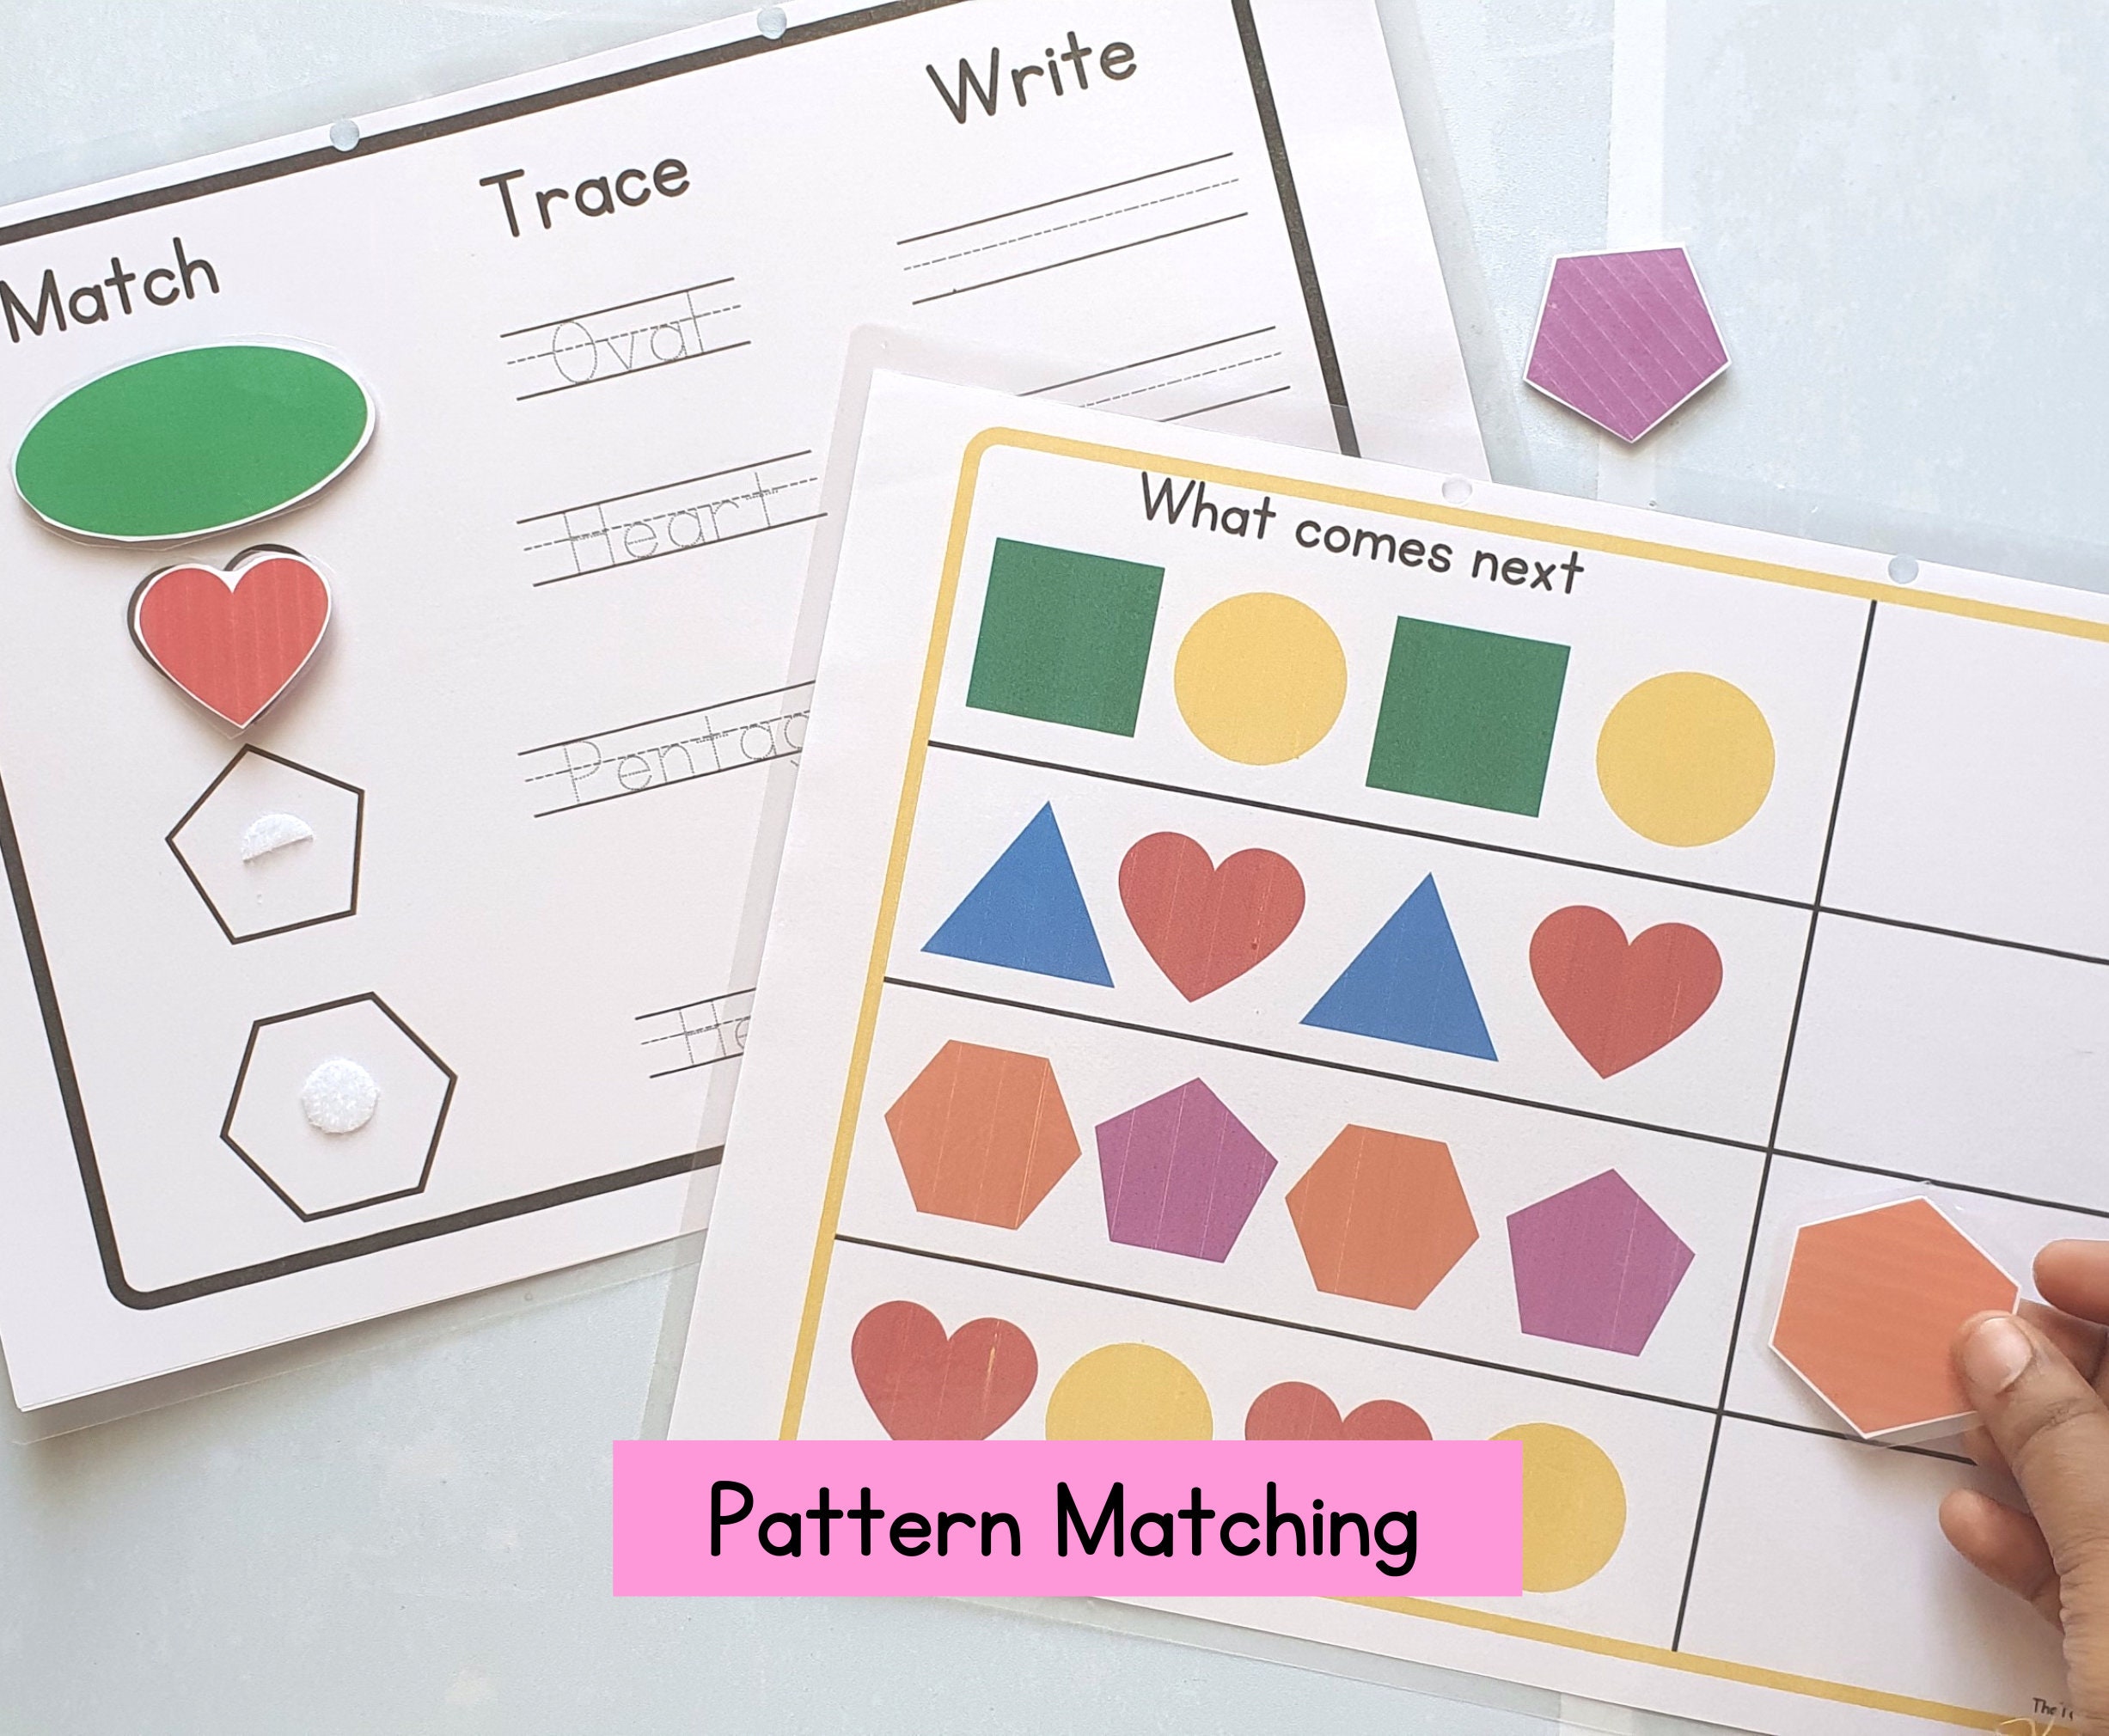 Shapes Matching game, Shape Matching Activity for Toddlers, Learning Shapes  Toddler Busy Book pintable Homeschool toddler printable activity